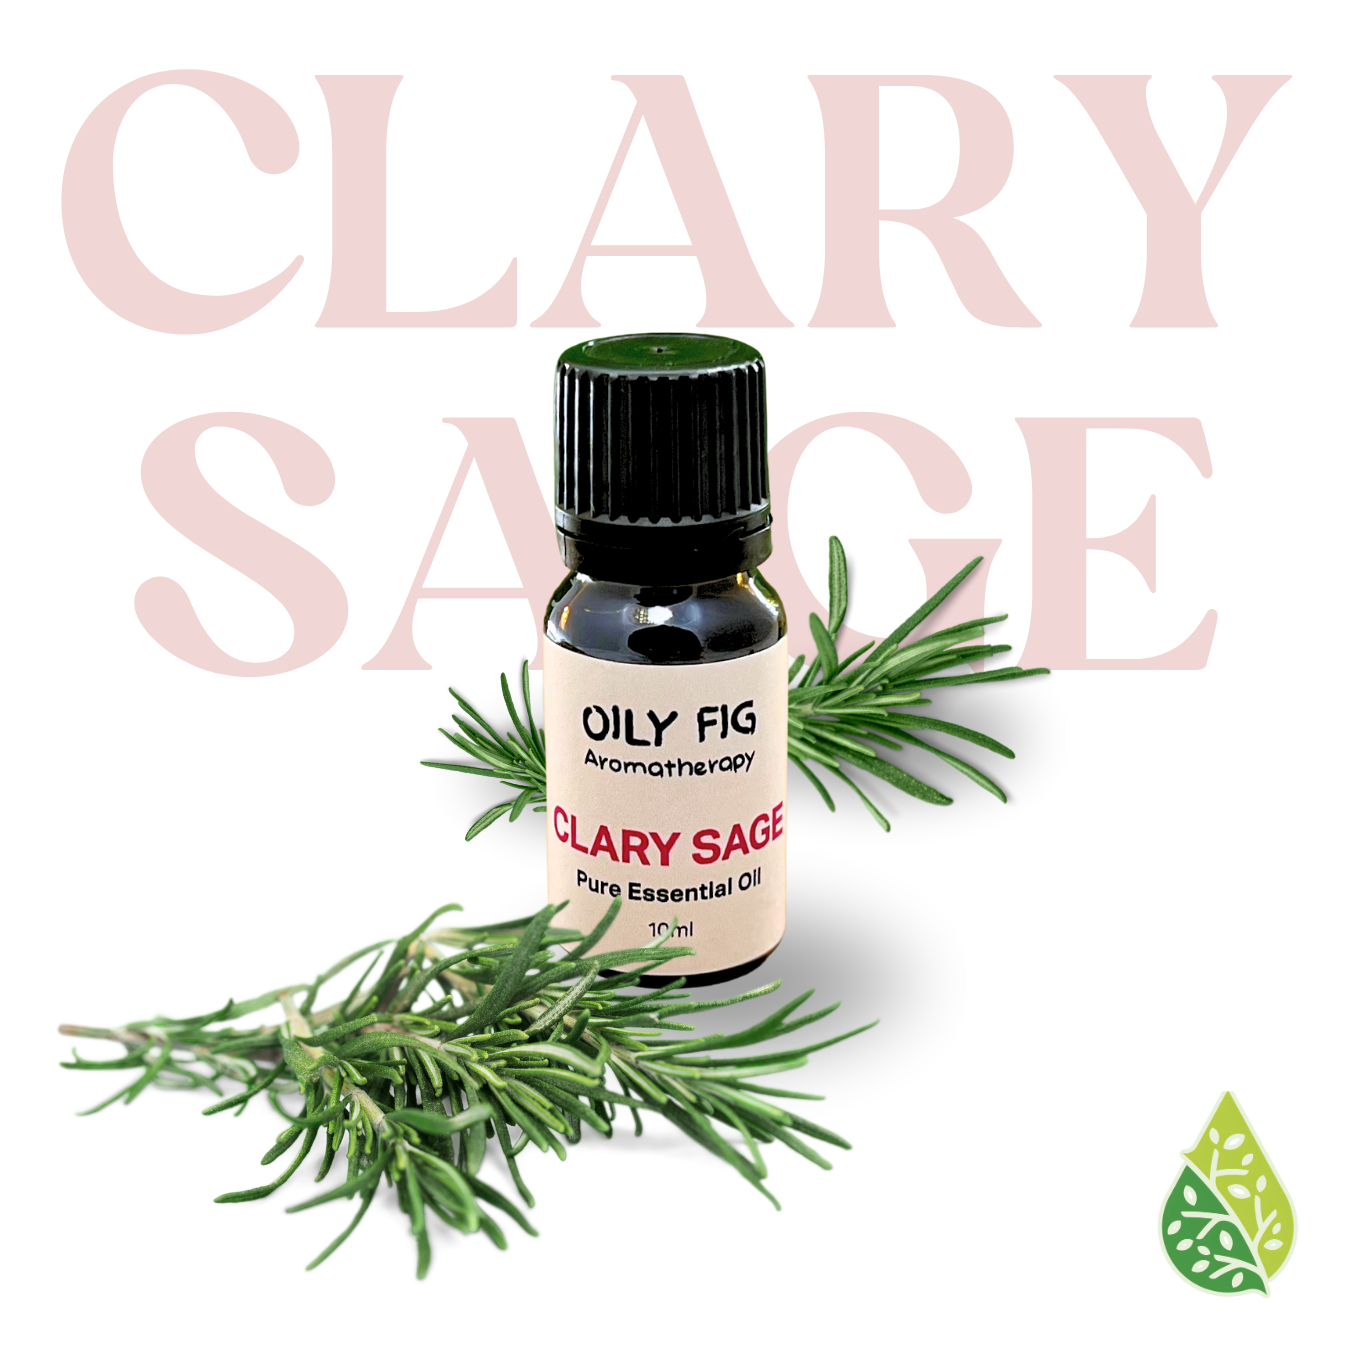 PURE Clary Sage essential oil